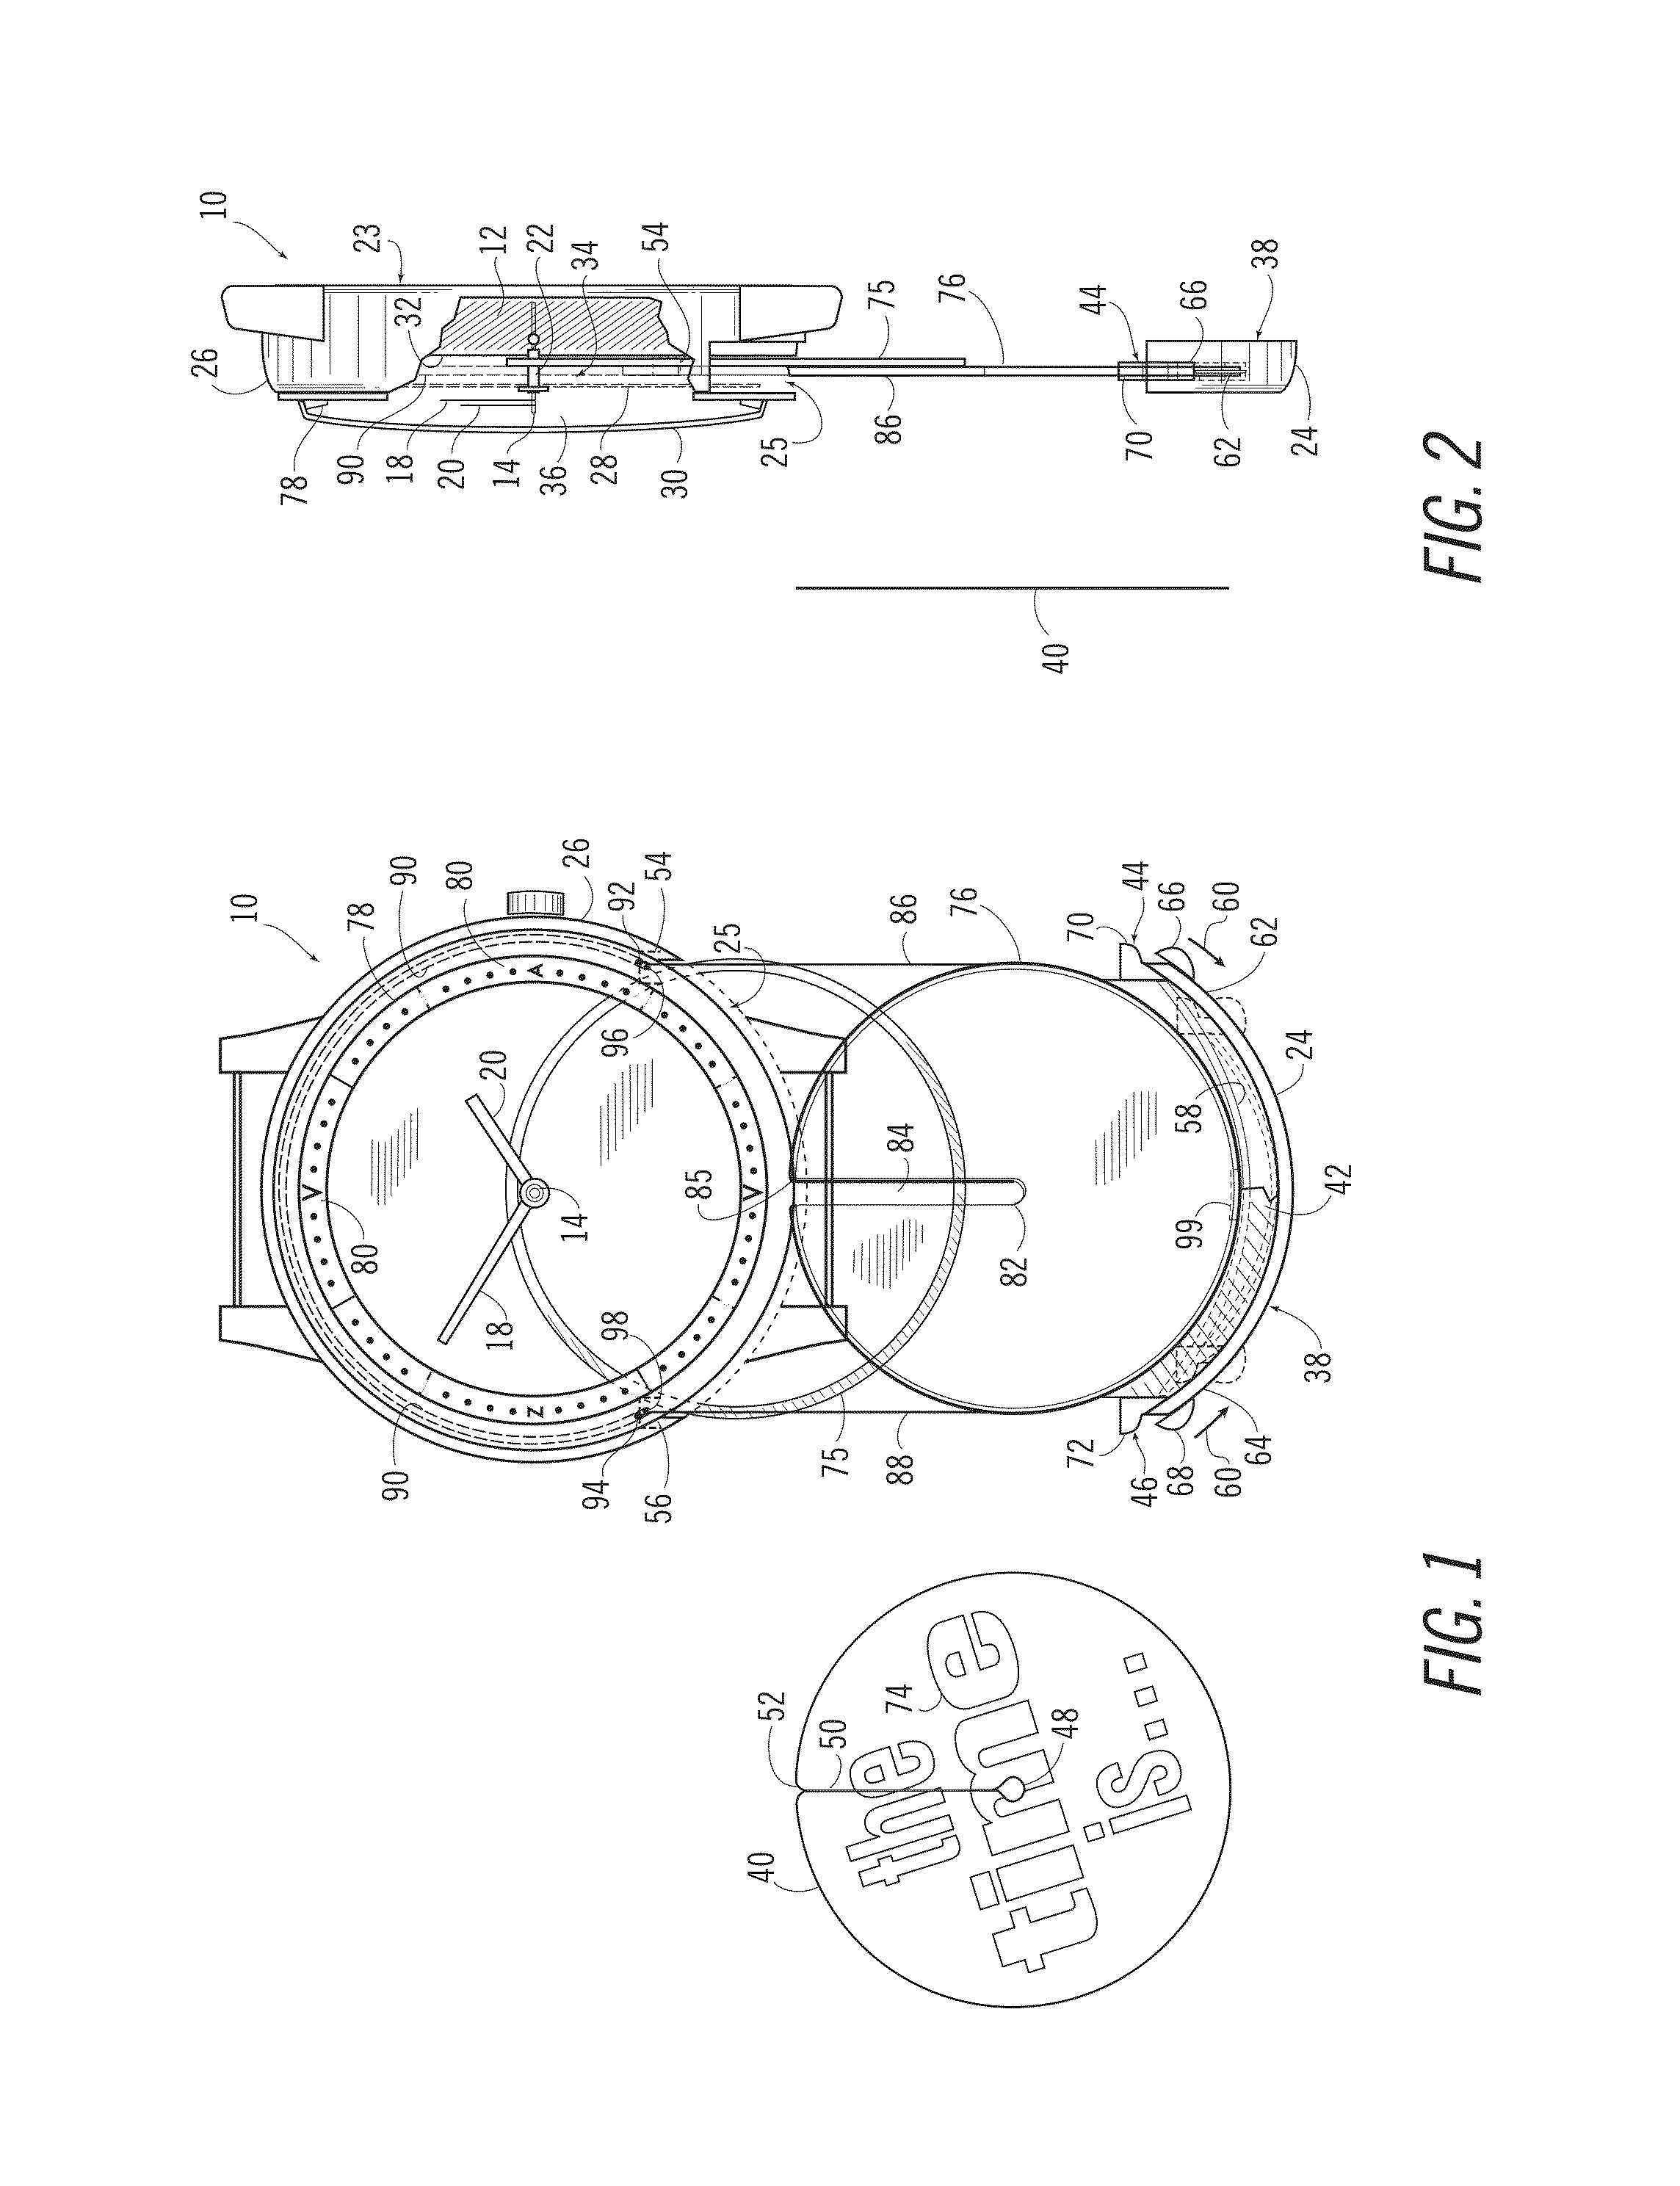 Apparatus for horologe with removable and interchangeable face